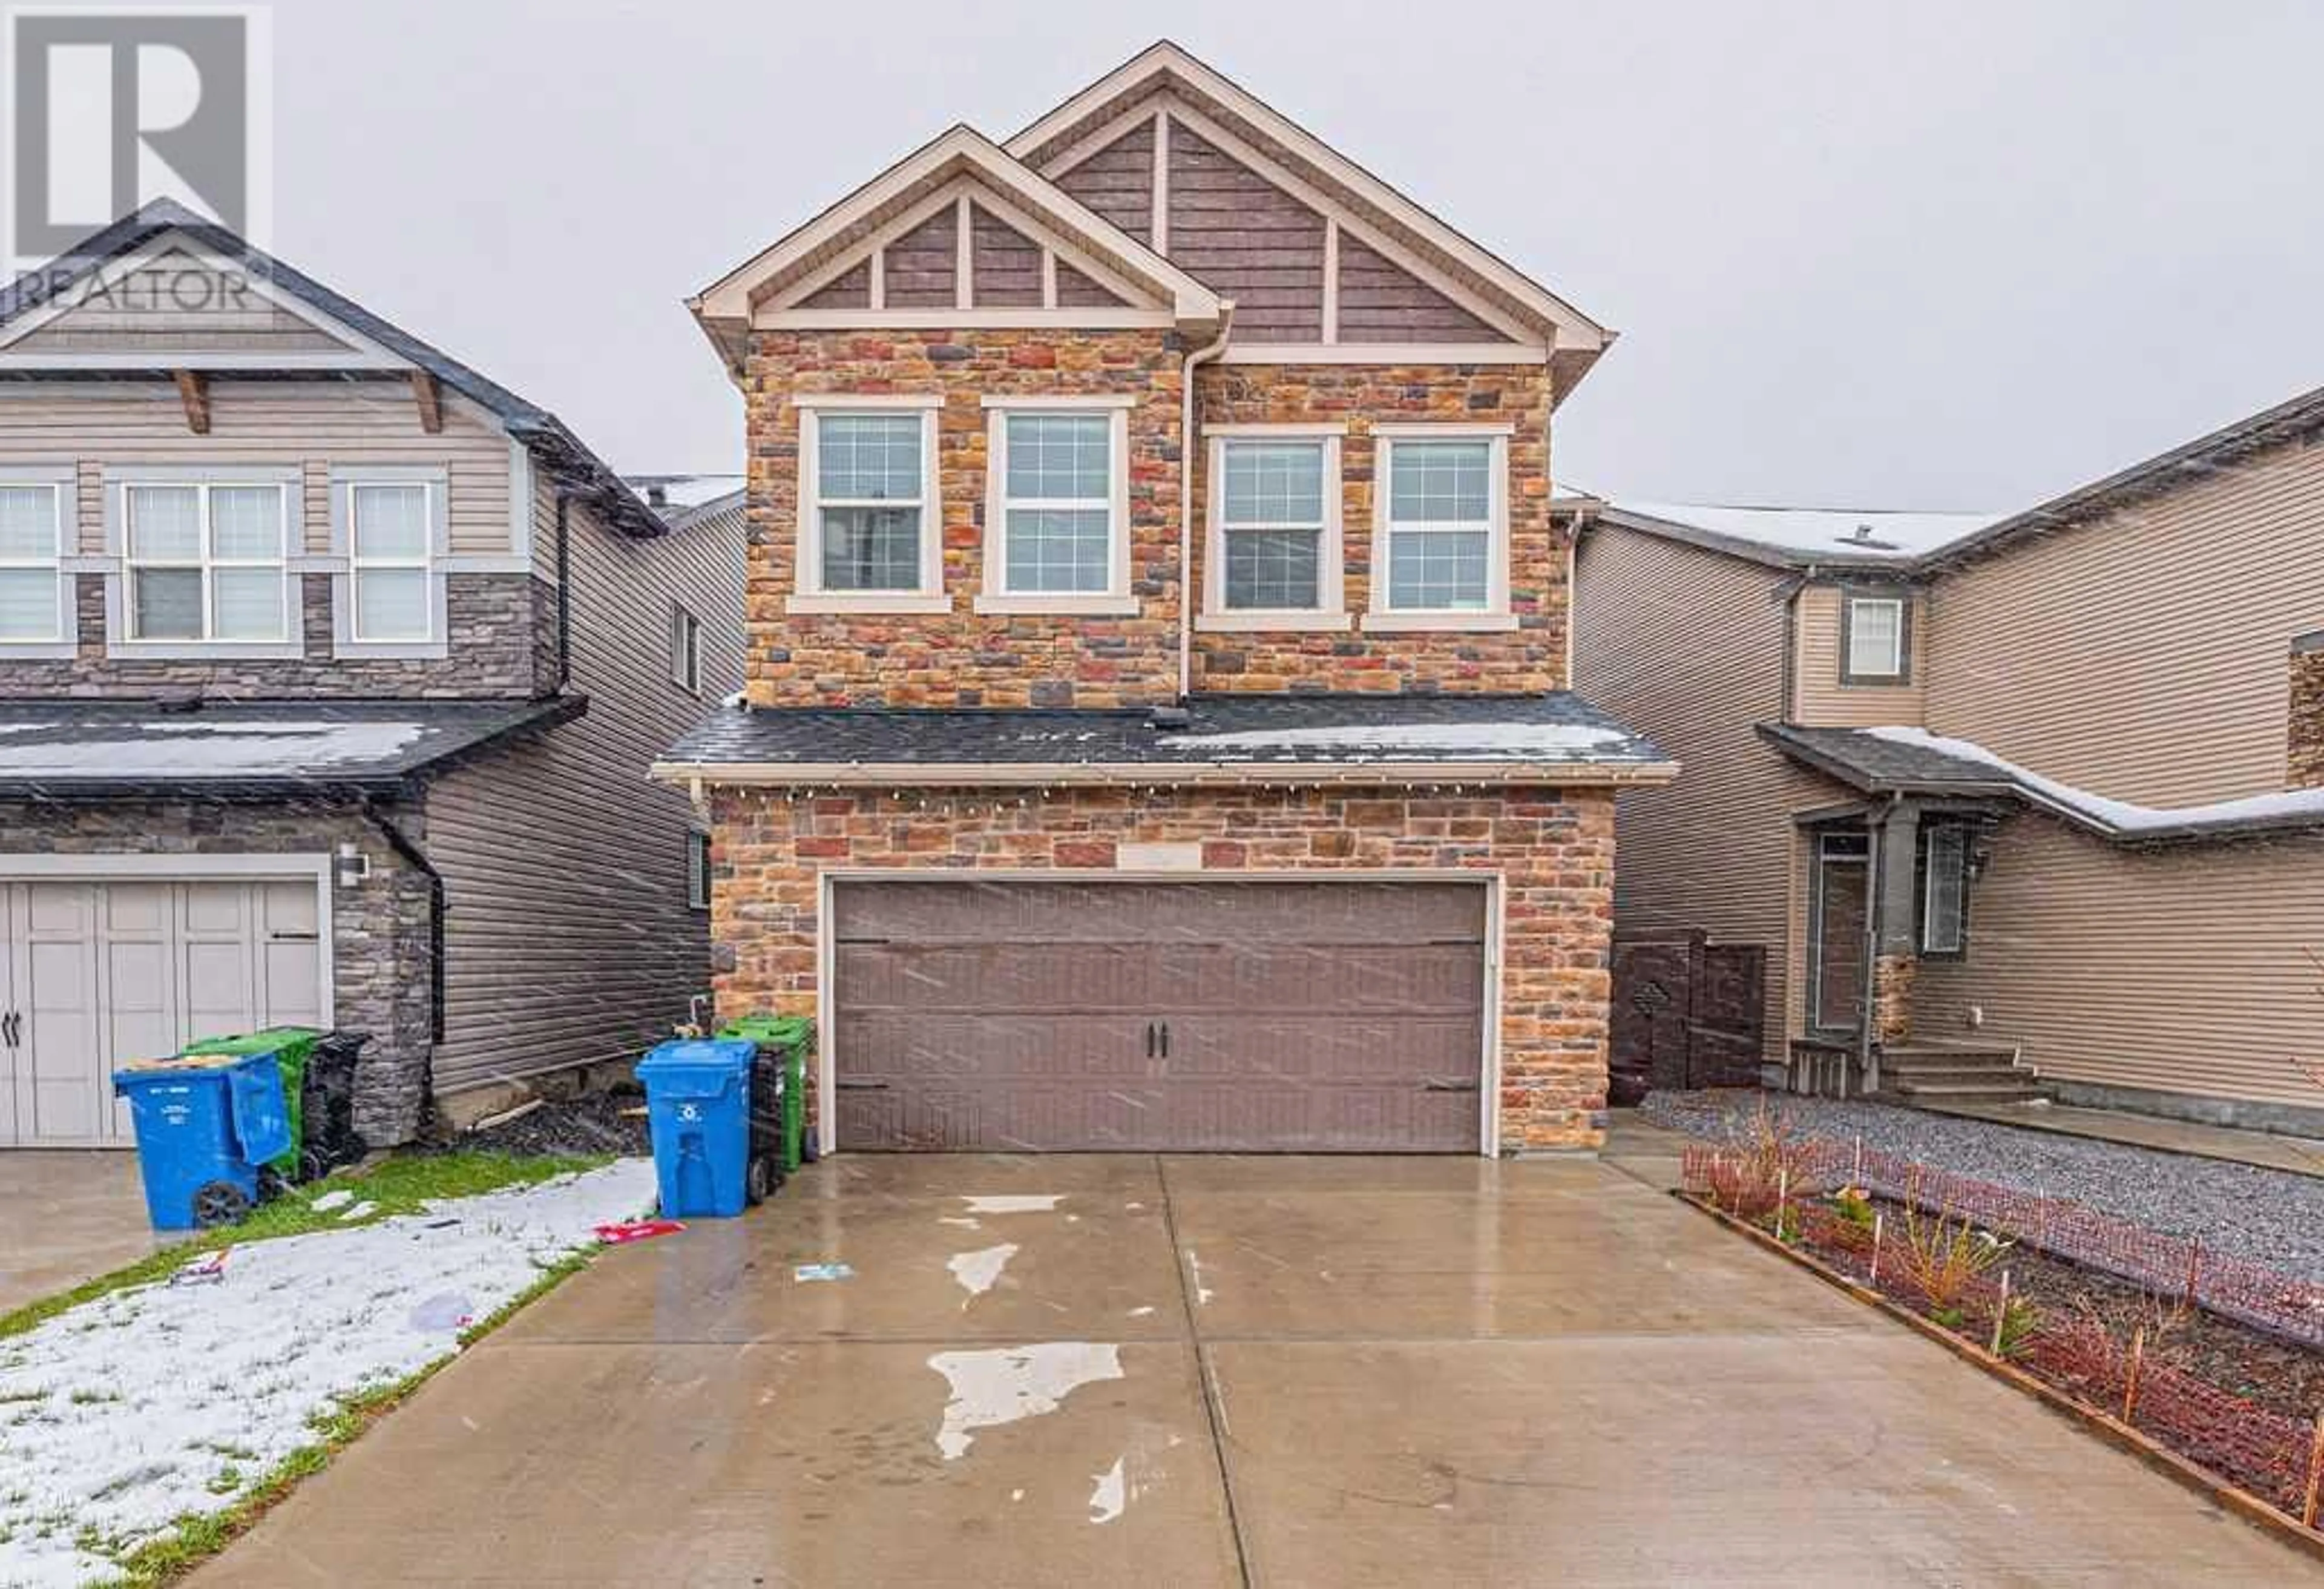 Frontside or backside of a home for 88 Nolanhurst Way NW, Calgary Alberta T3R0Z1